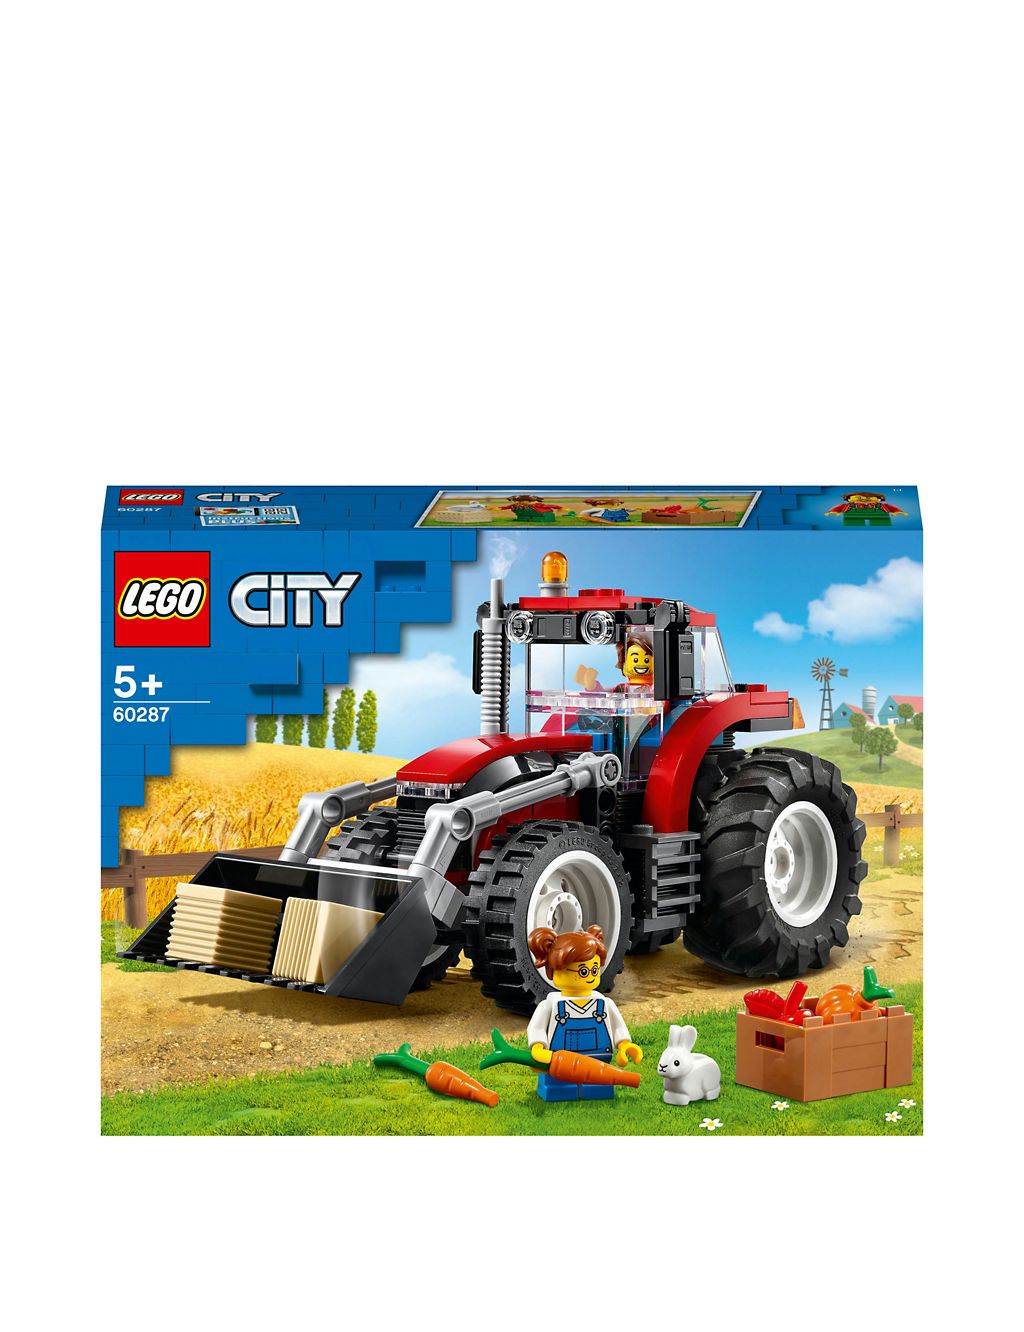 LEGO® City Tractor 60287 (5+ Yrs) 1 of 6